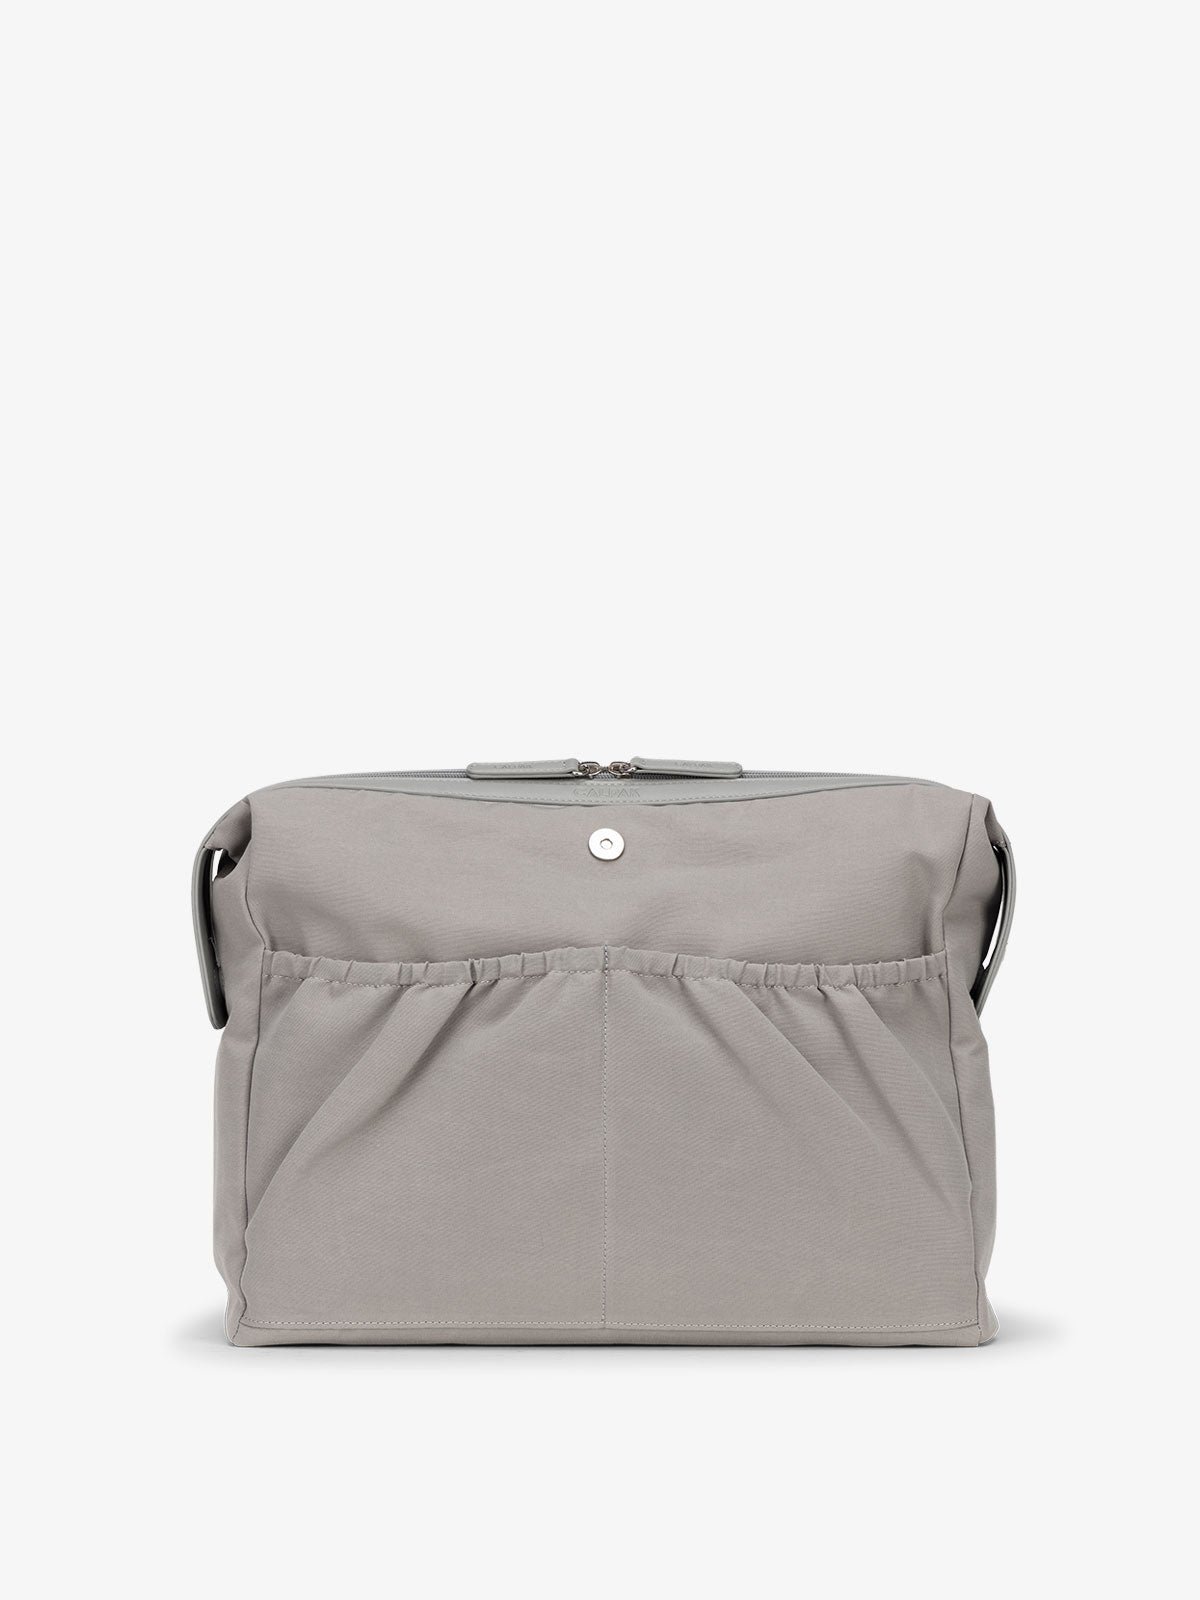 tote bag laptop sleeve with pockets in smoke gray